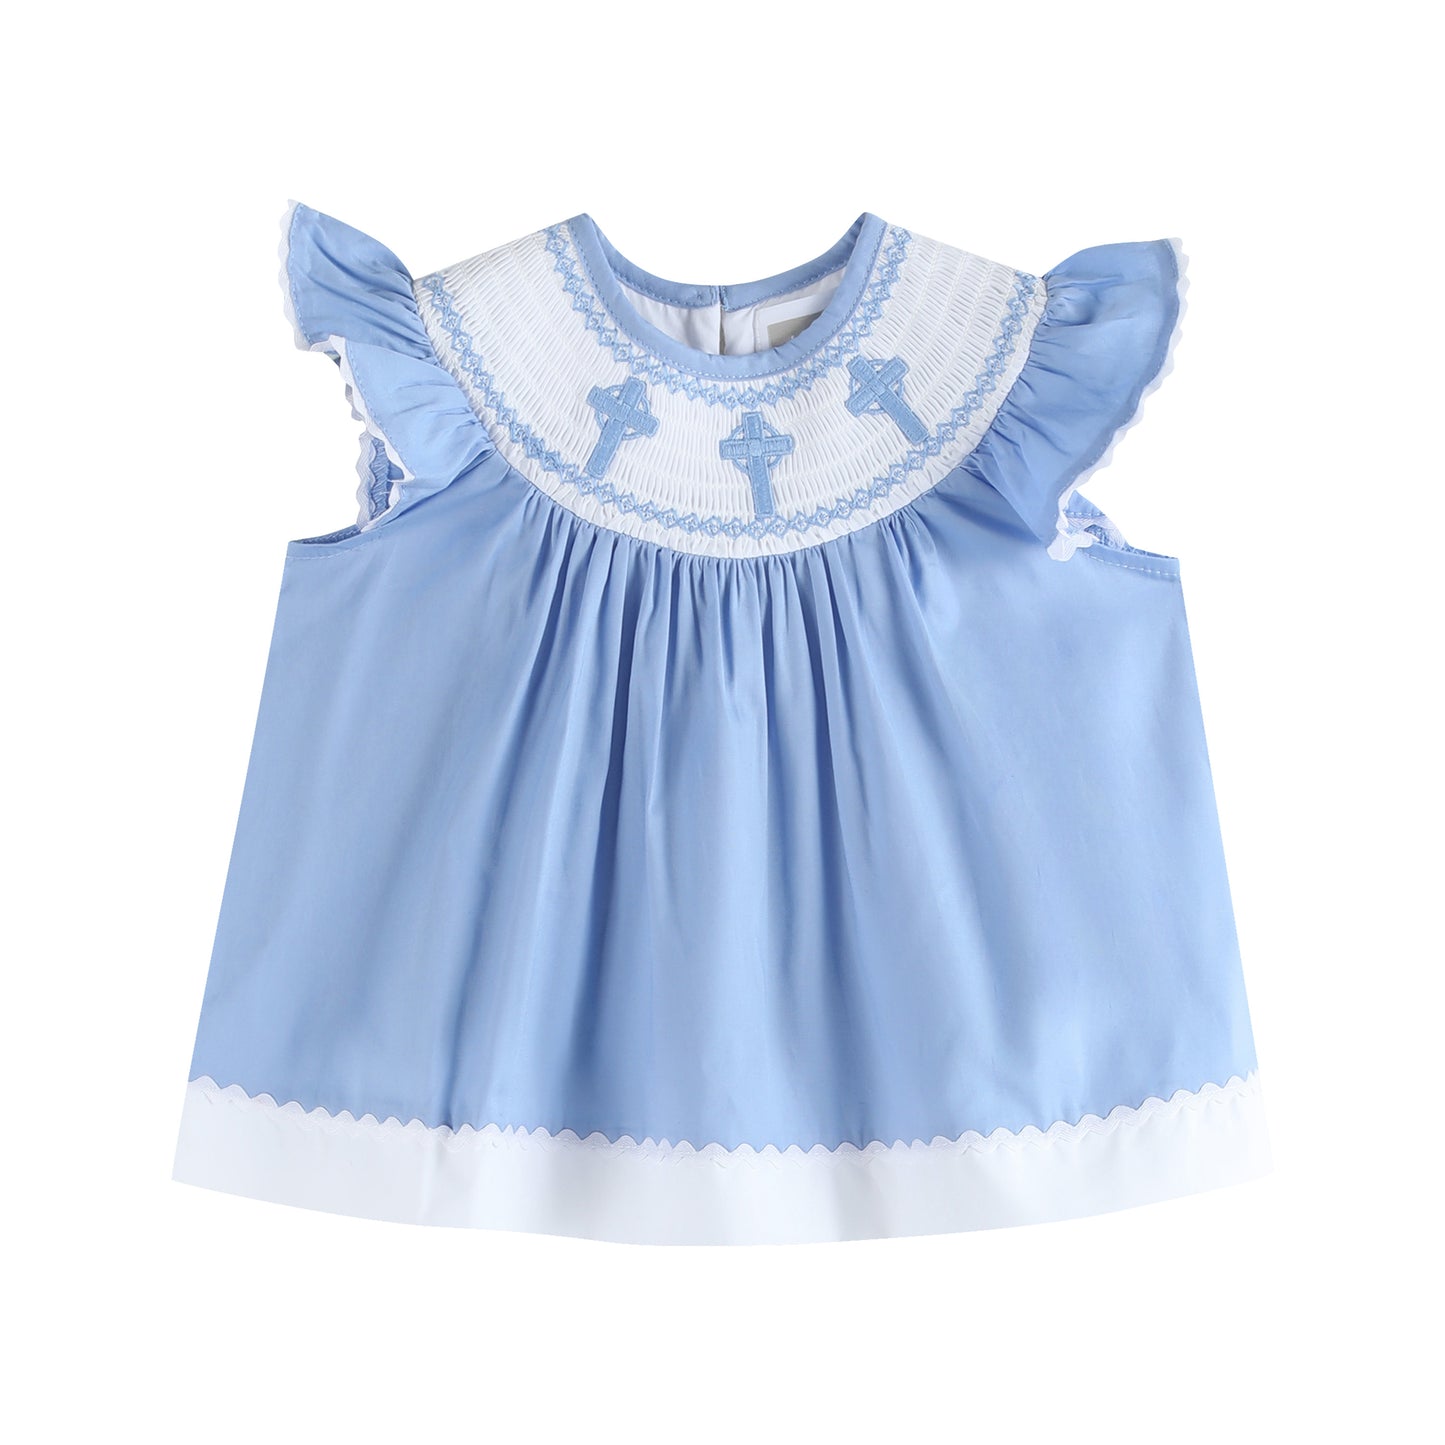 Periwinkle Blue Crosses Smocked Dress and Bloomers Set